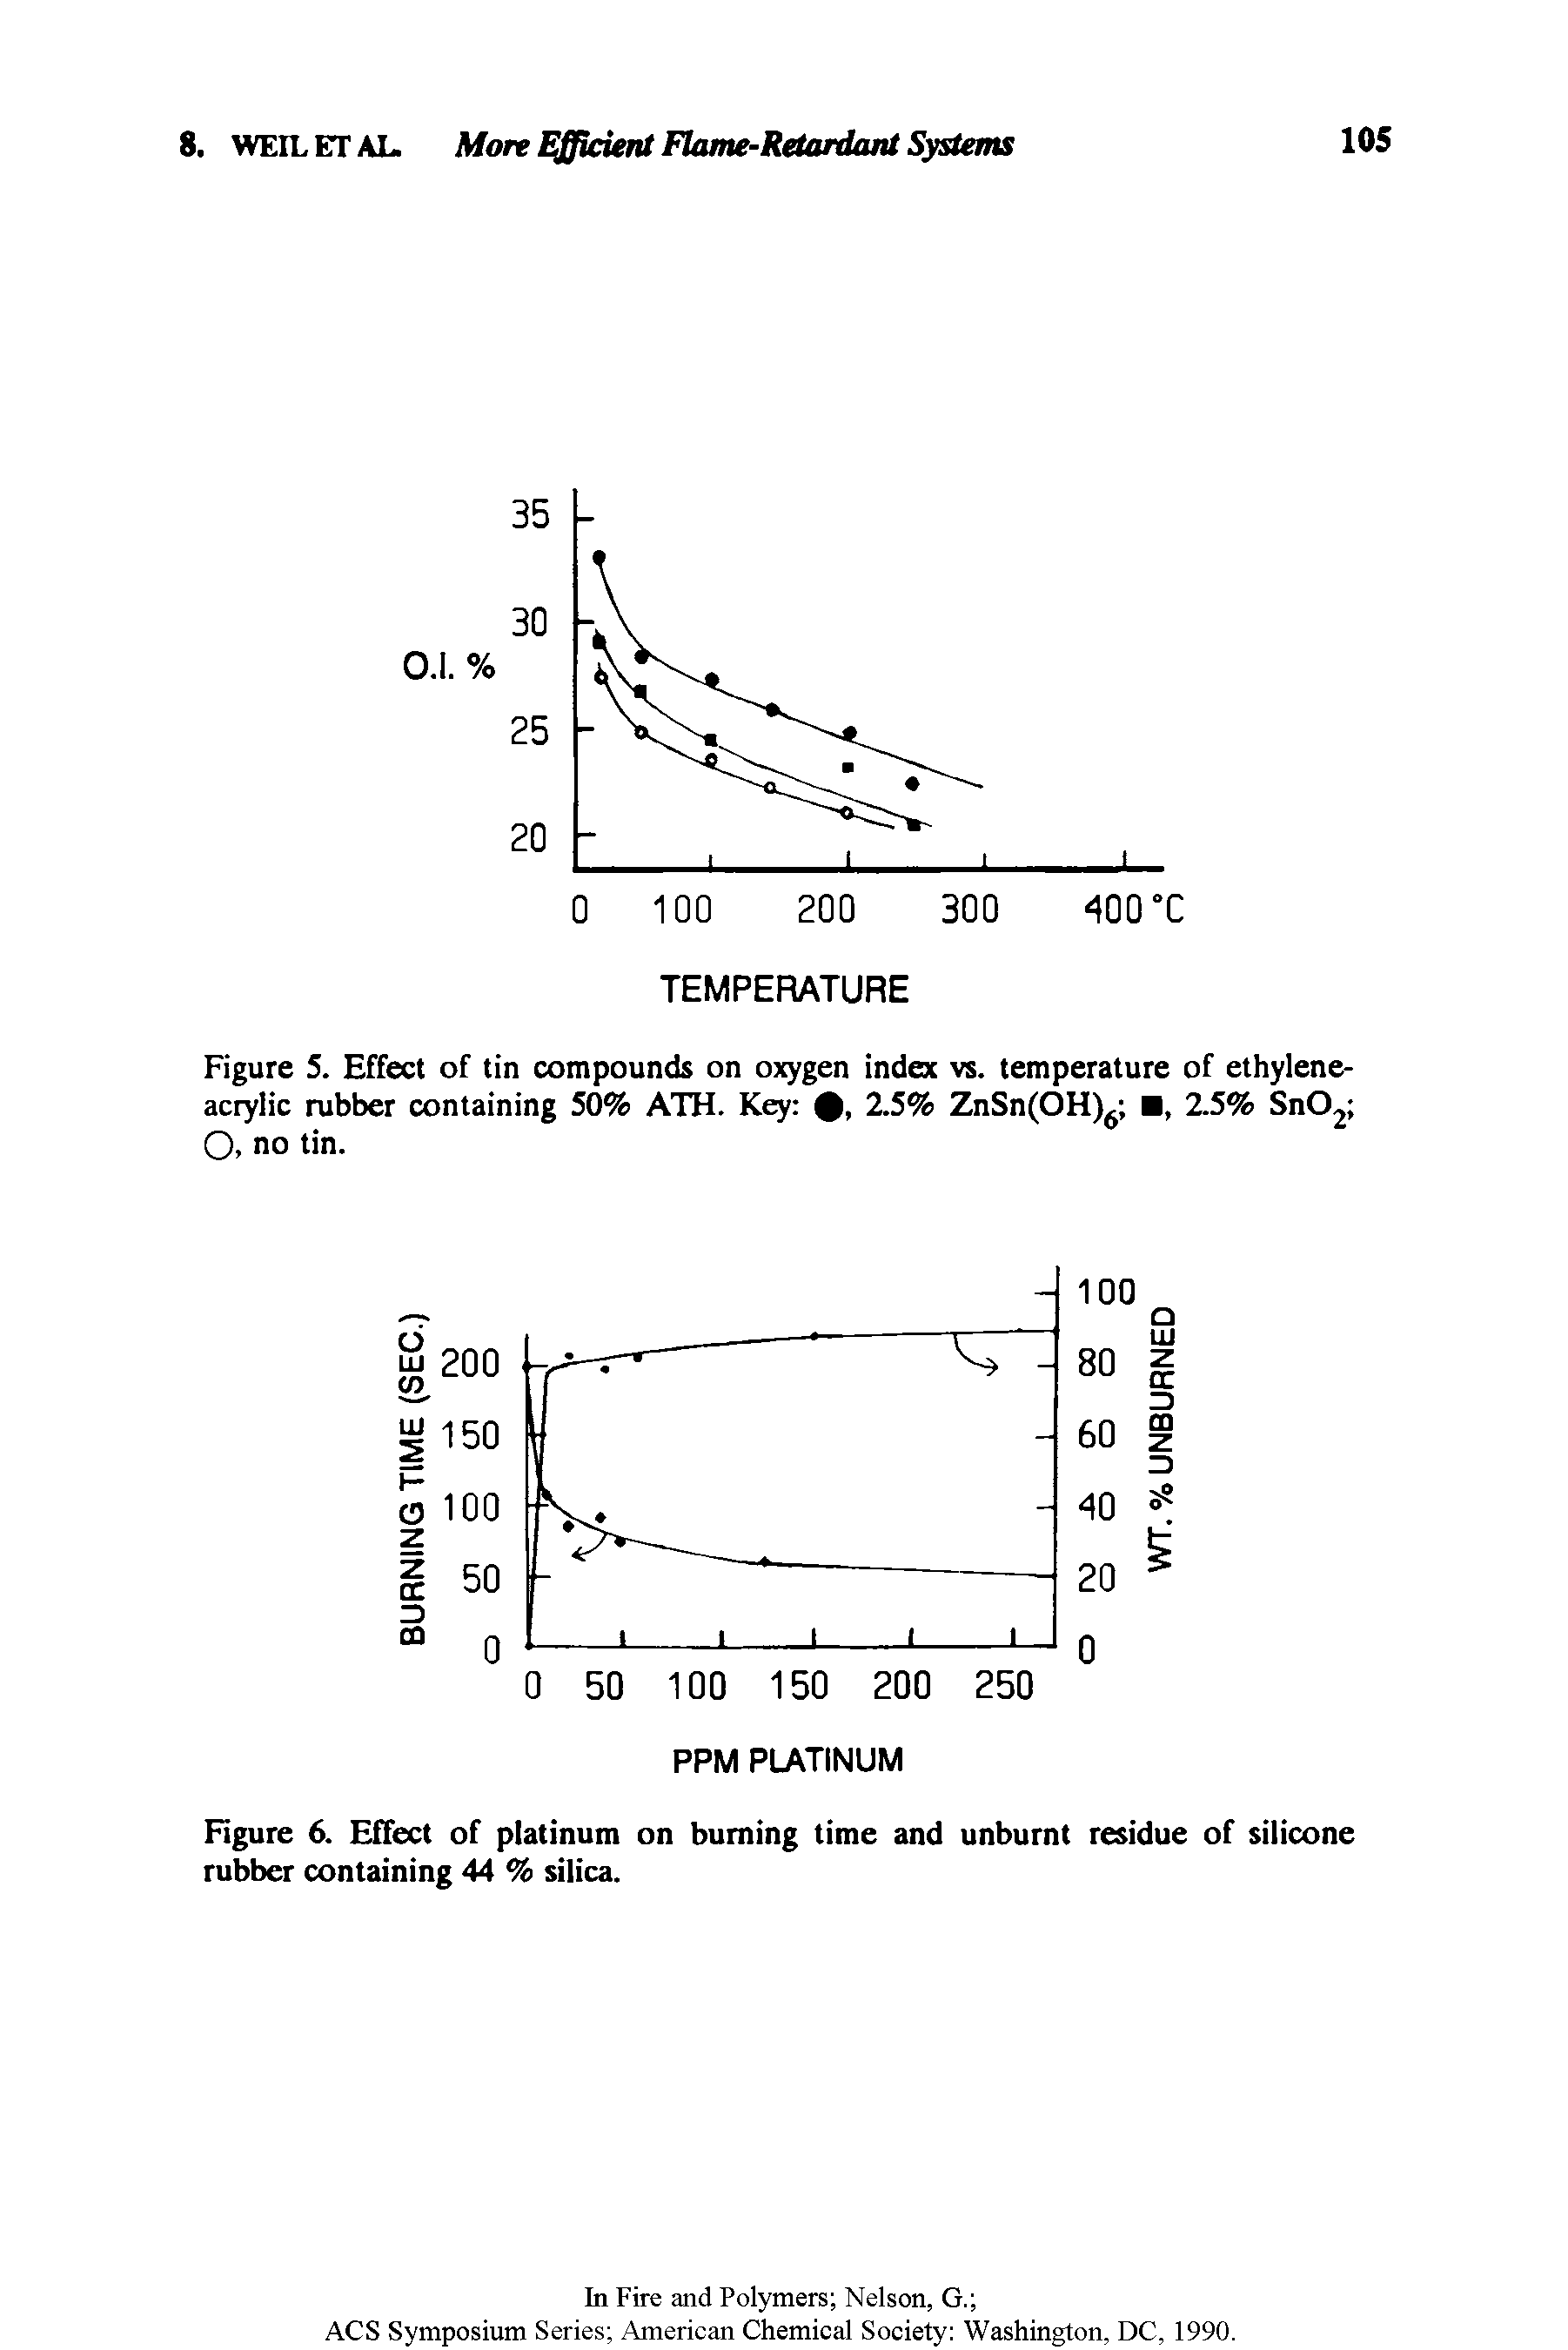 Figure 6. Effect of platinum on burning time and unburnt residue of silicone rubber containing 44 % silica.